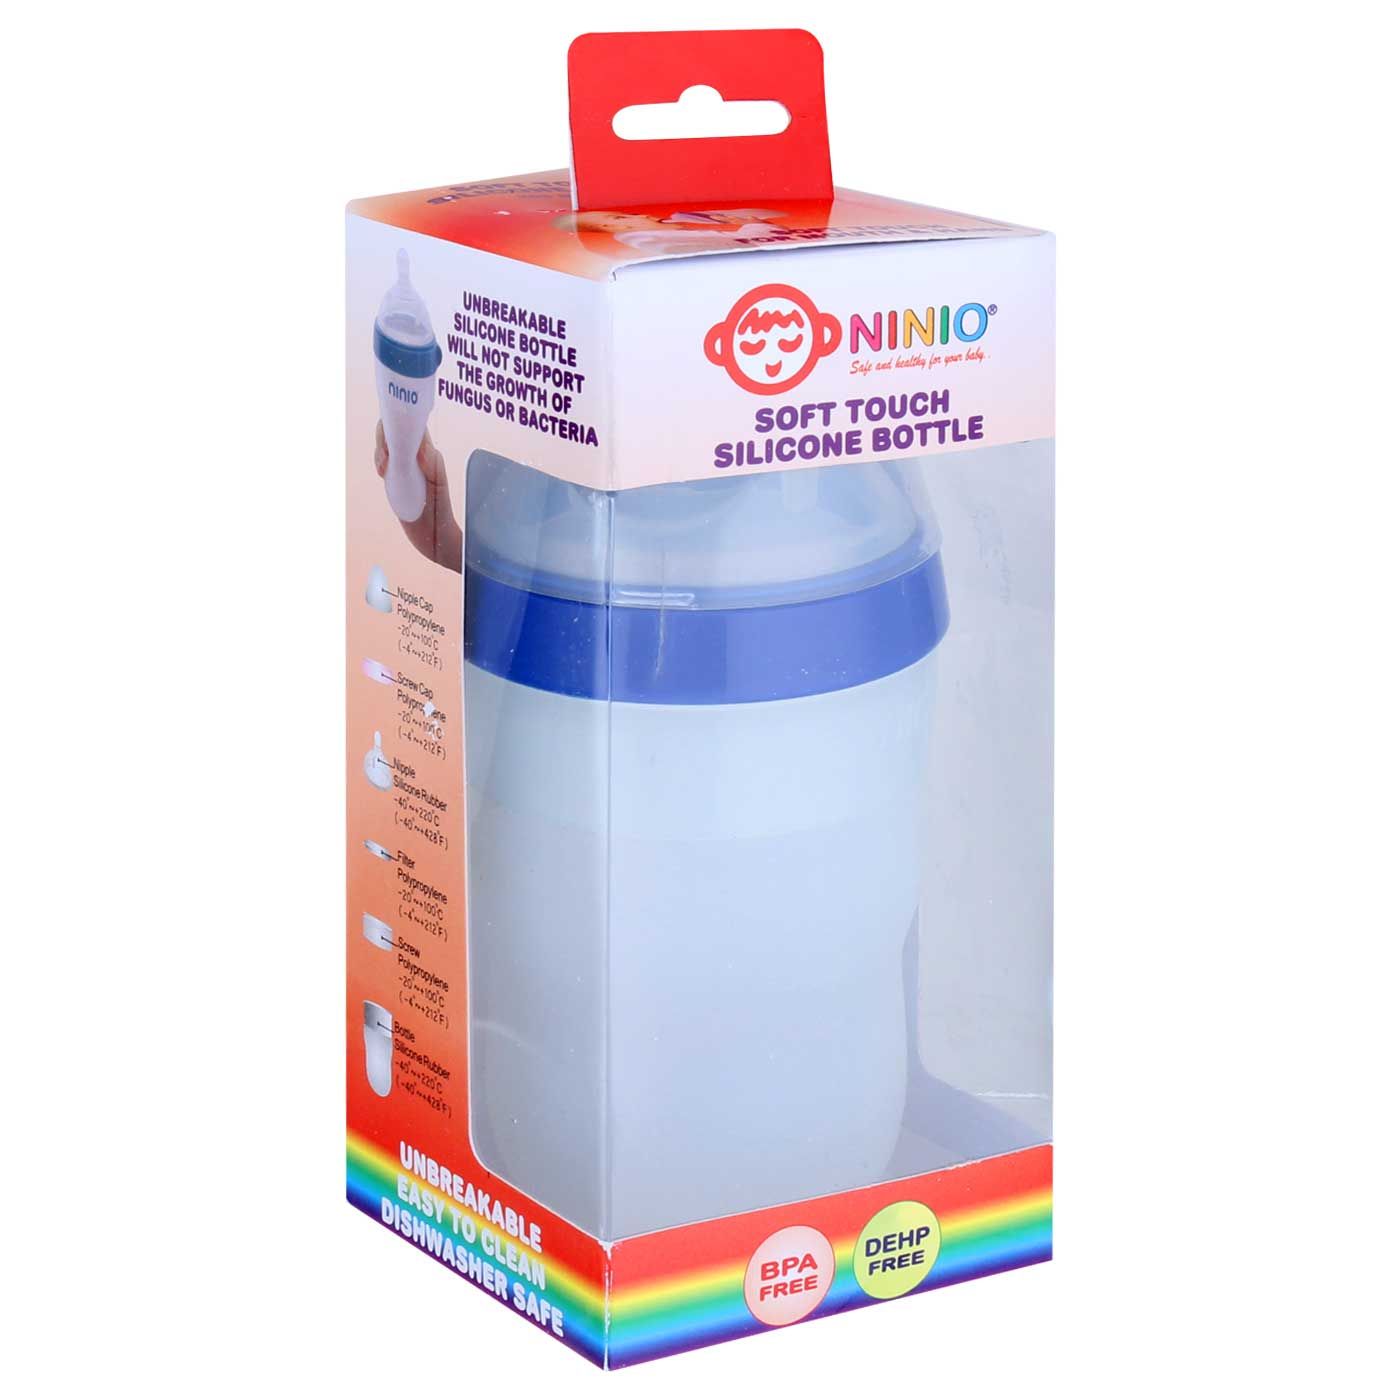 Ninio Silicone Bottle with Filter 7oz Blue - 5